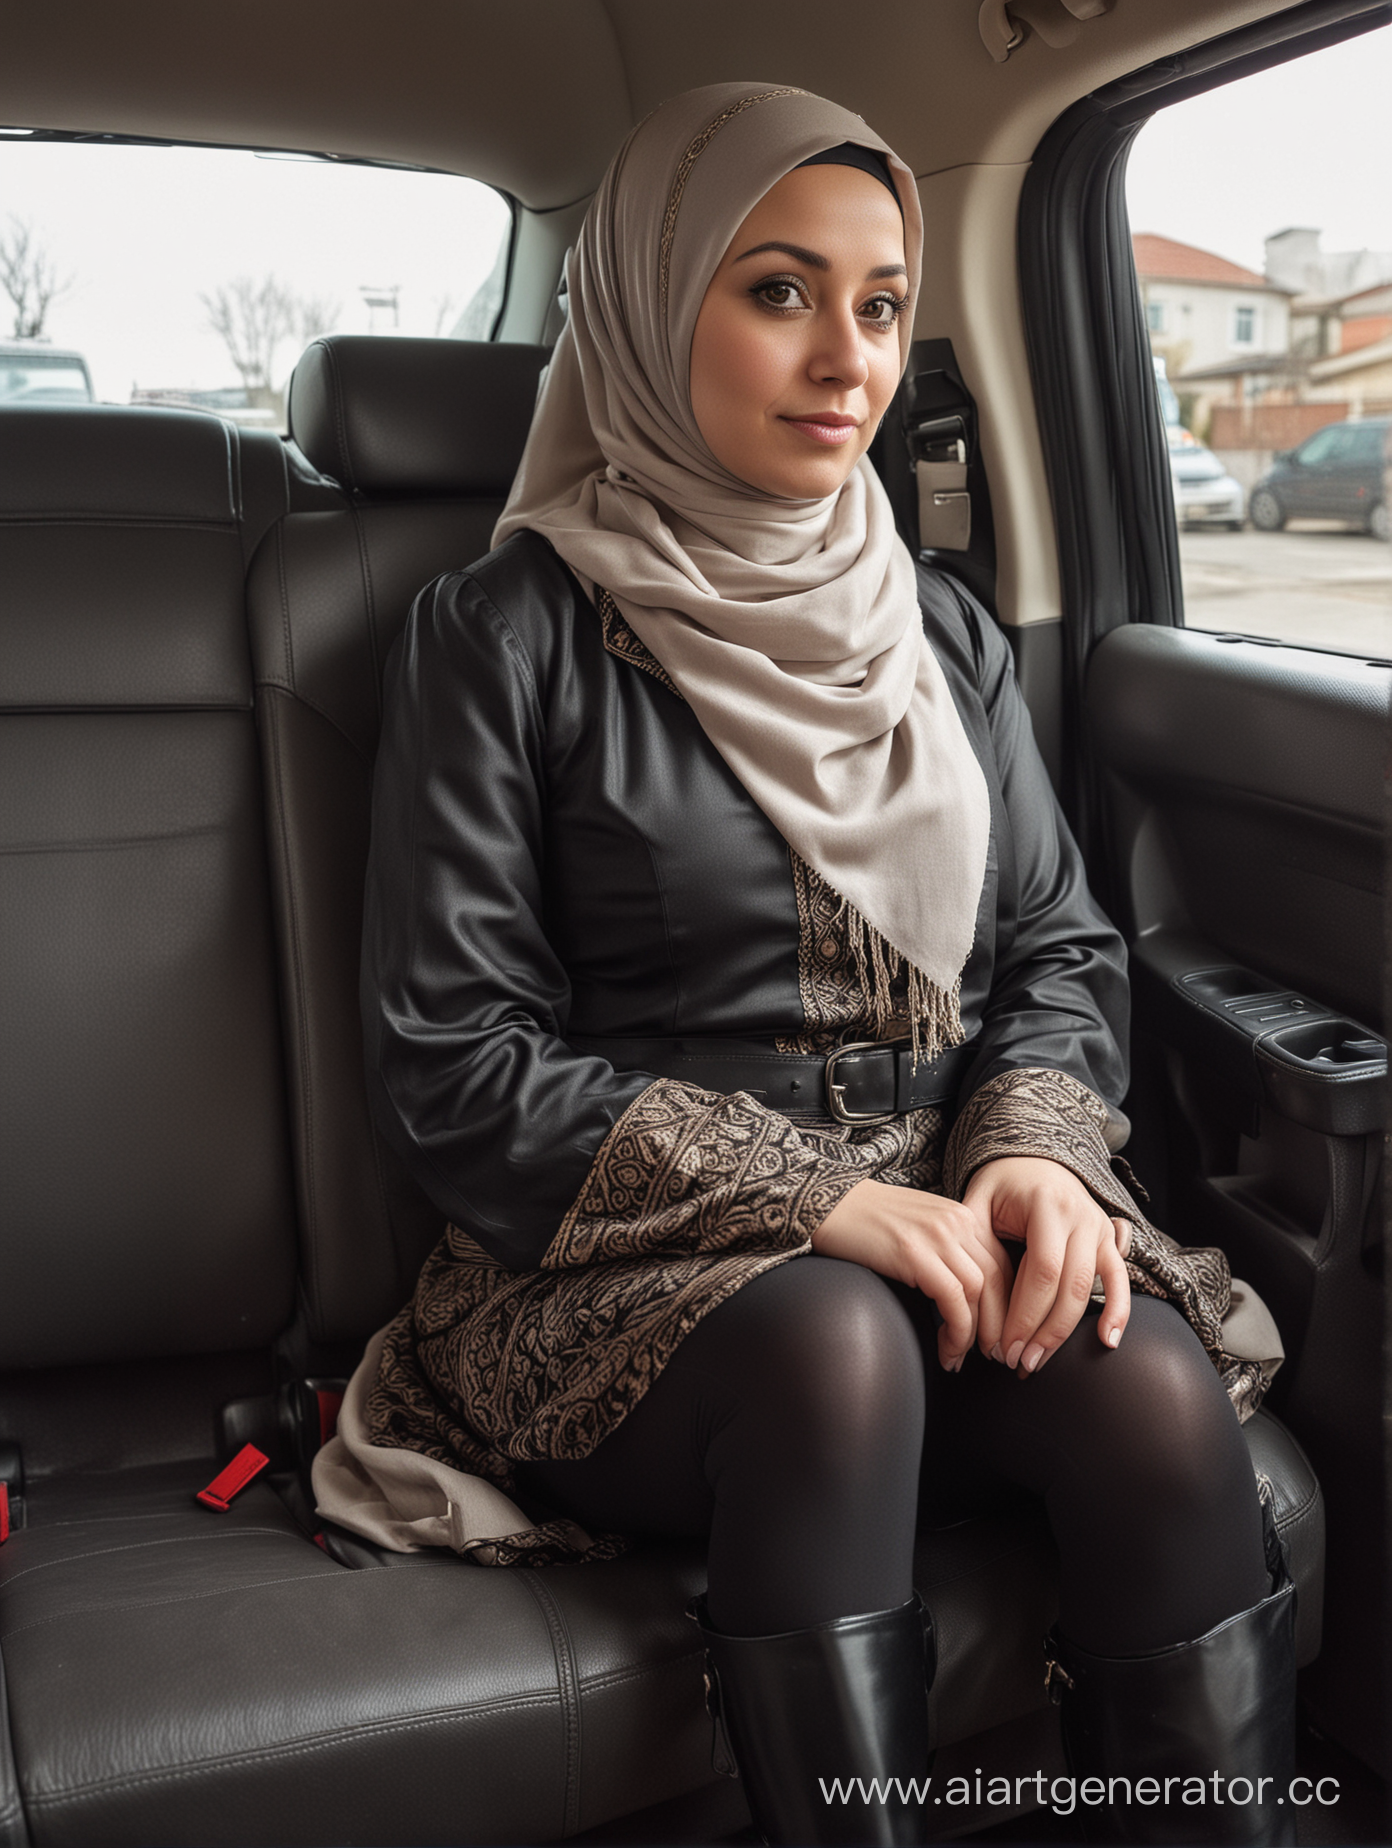 A dwarf woman, 40 years old, hijab, black opaque tights, high boots, tunic, sits car seat, from side, top view, turkish, hairless, plump body, 